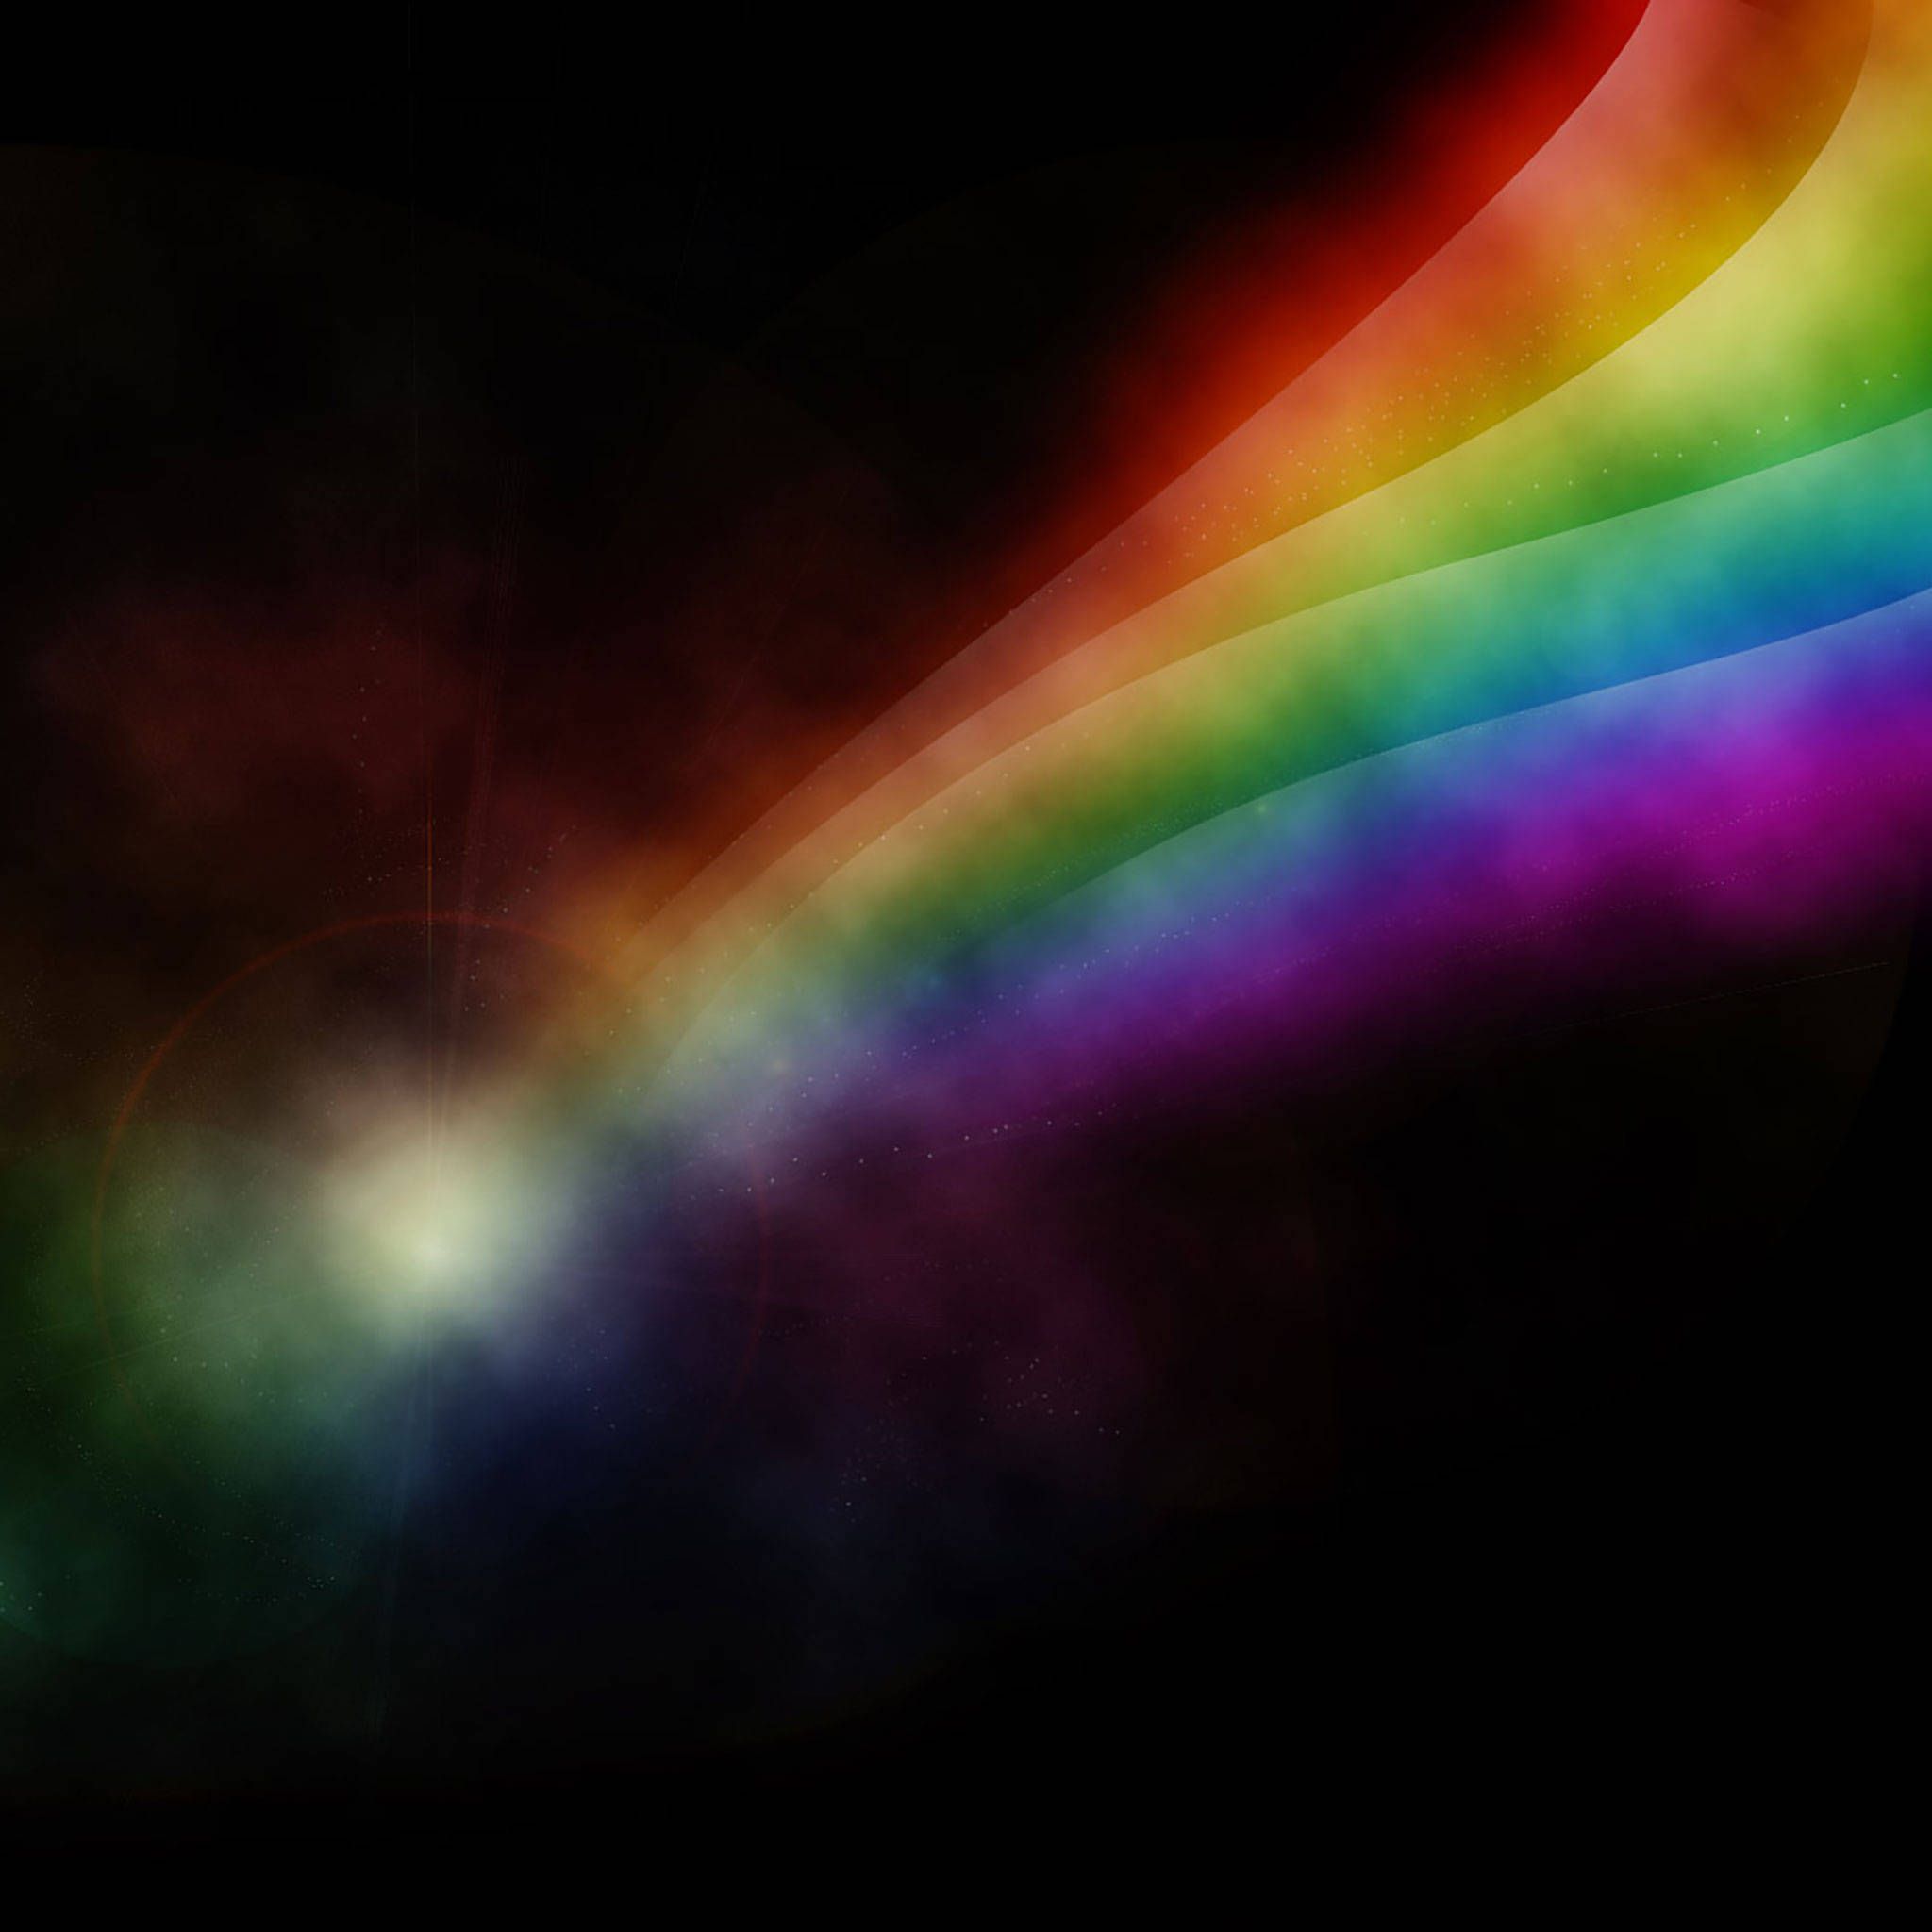 A rainbow colored abstract wallpaper - Rainbows